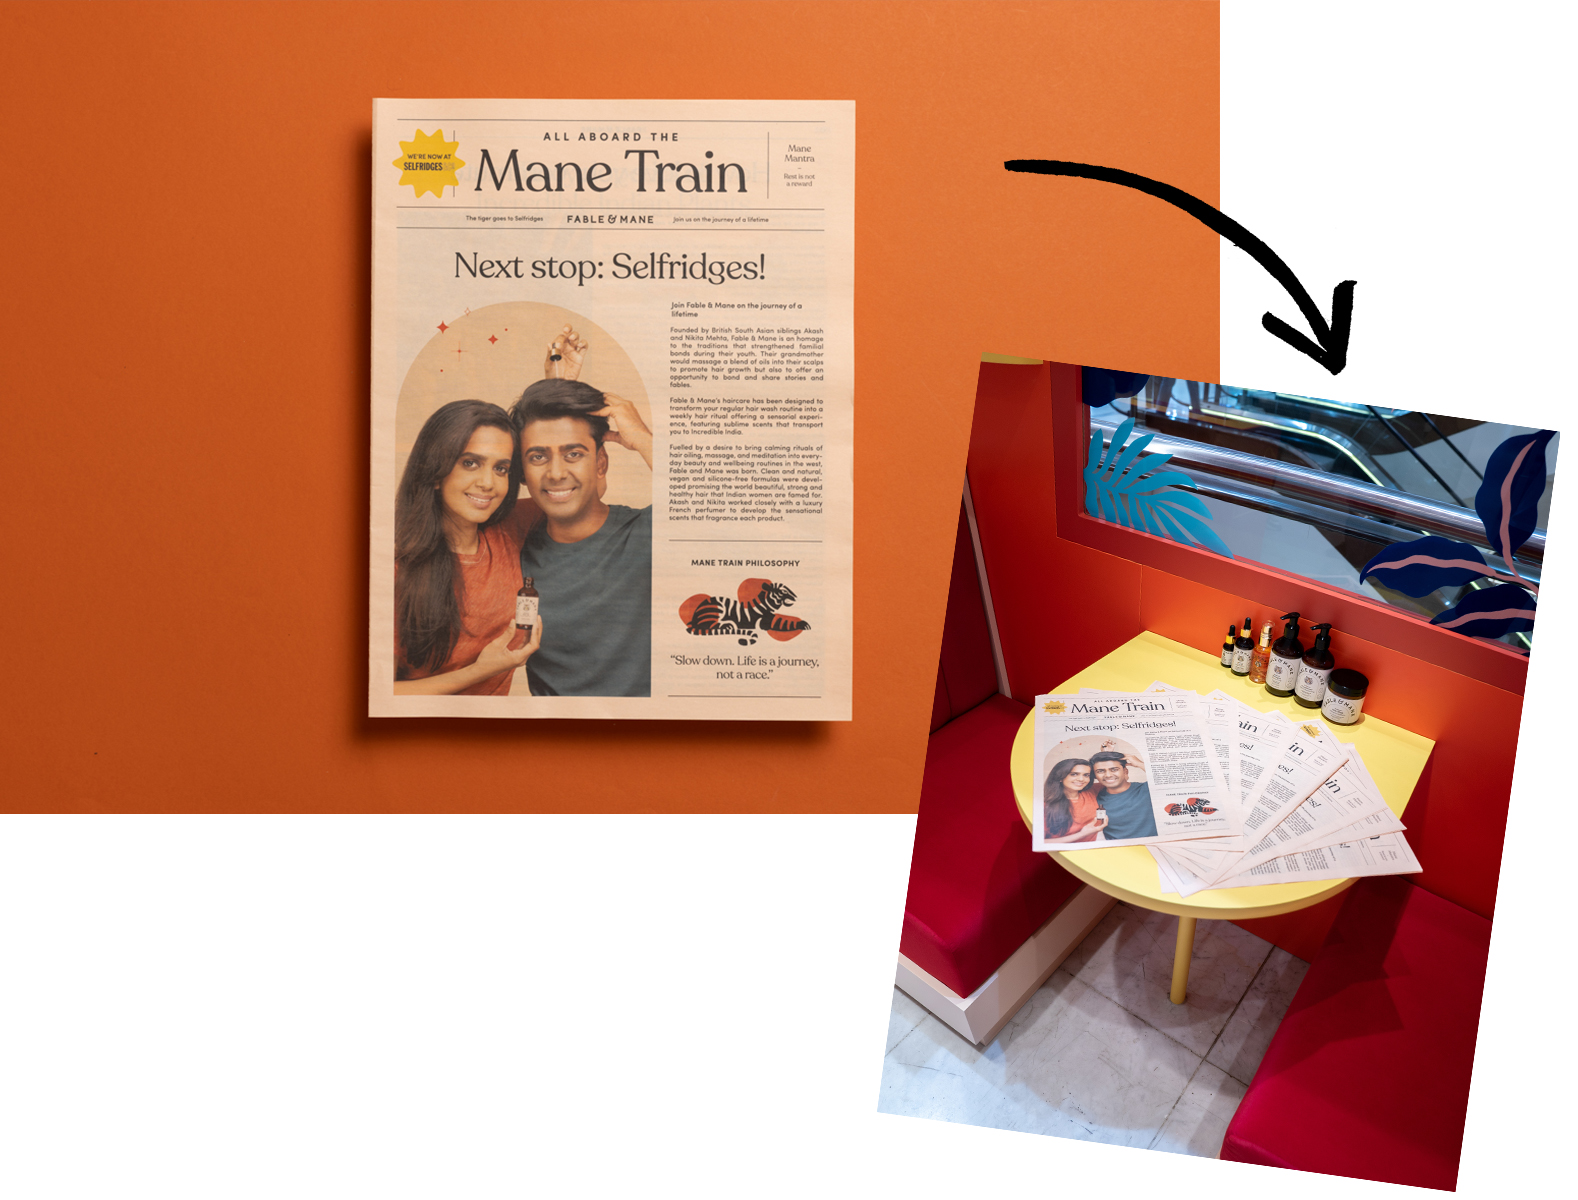 Fable & Mane newspaper for Selfridges pop-up event printed by Newspaper Club